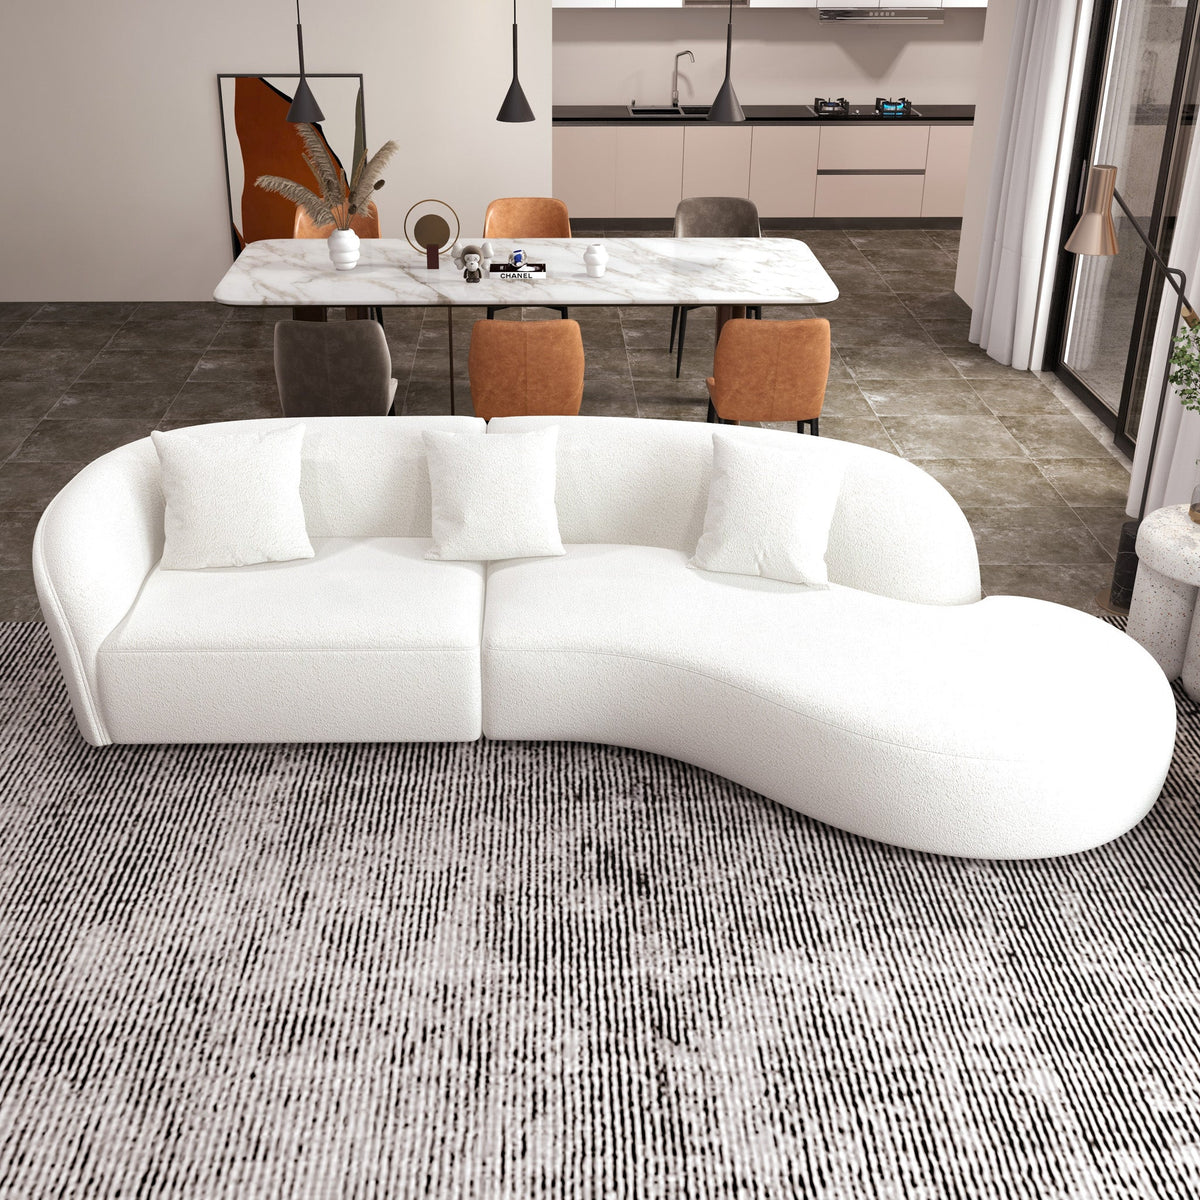 Galleria Sectional Sofa - White Boucle Couch | MidinMod | TX | Best Furniture stores in Houston